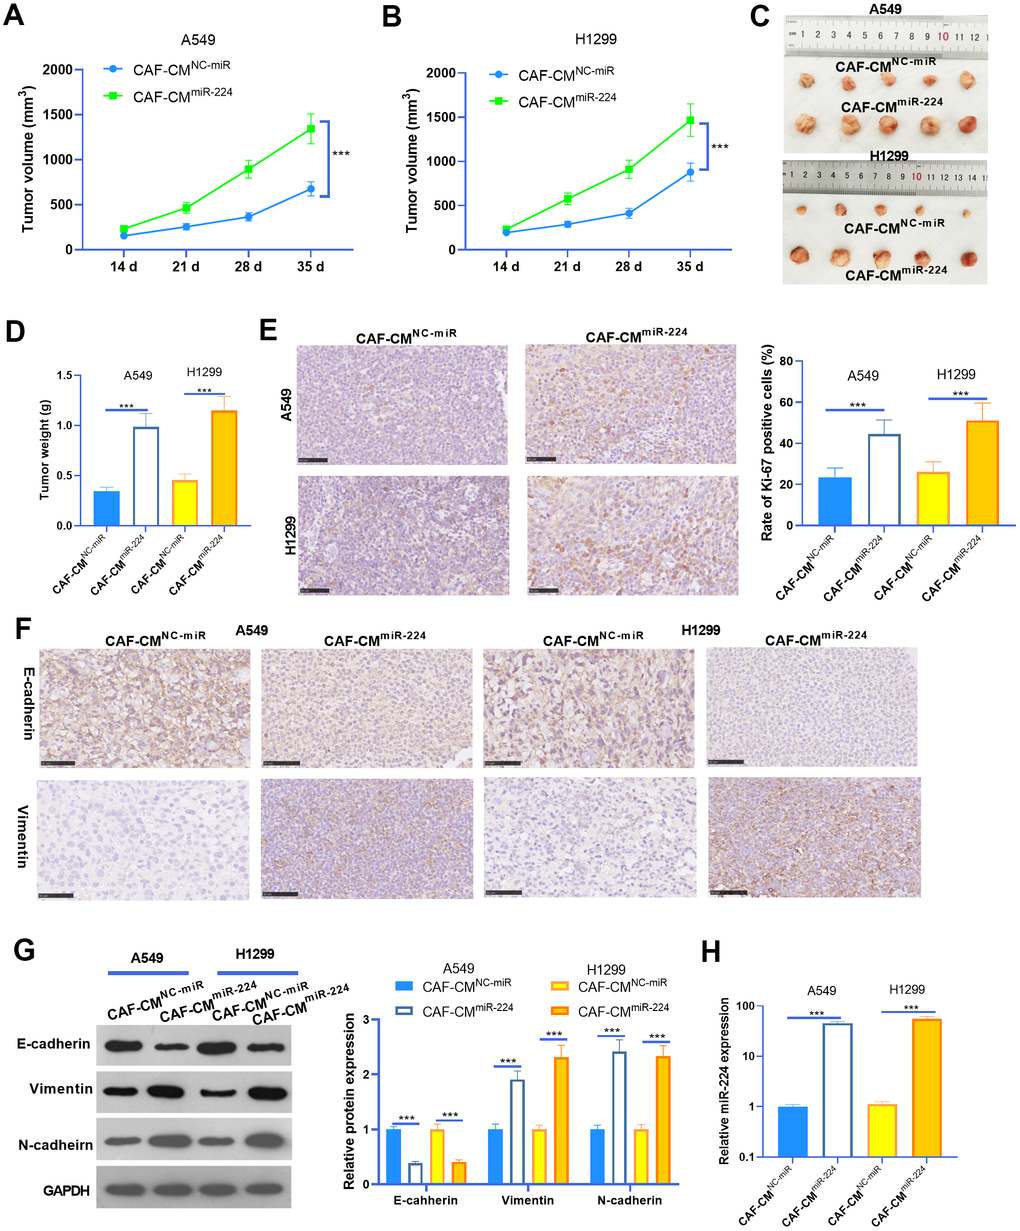 miR-224 promoted CAF-mediated oncogenic effects in vivo. A549 and H1299 treated with CAF-CMmiR-224 were used for the xenograft tumor experiment in nude mice. (A, B) Tumor volumes within five weeks of incubation. (C, D) Tumor images and weight at the fifth week. (E) IHC was performed to detect the proliferation (marked by Ki-67) of NSCLC cells, and the rate of Ki-67 positive cells was counted. (F) IHC was performed to detect E-cadherin and Vimentin in the tumor tissues. (G) The EMT markers of E-cadherin, Vimentin, and N-cadherin in the formed tumor tissues were detected by western blot. (H) RT-PCR was implemented to detect miR-224 expression in the tumors. *** represents P